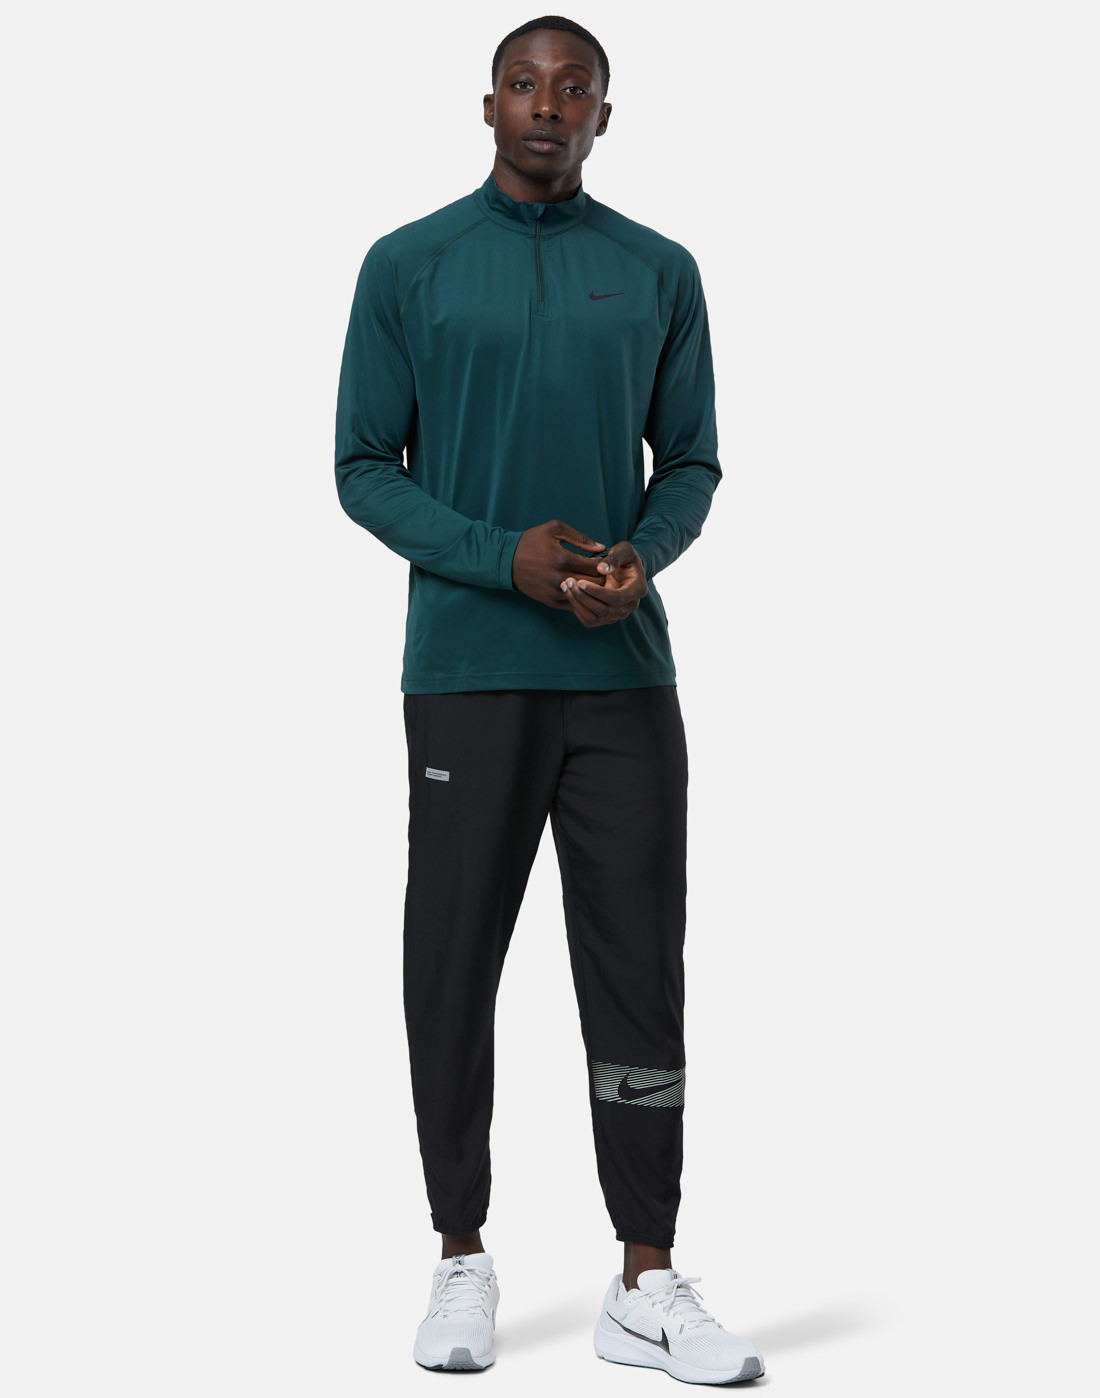 Nike Mens Ready Knit Half Zip Top - Green | Life Style Sports IE